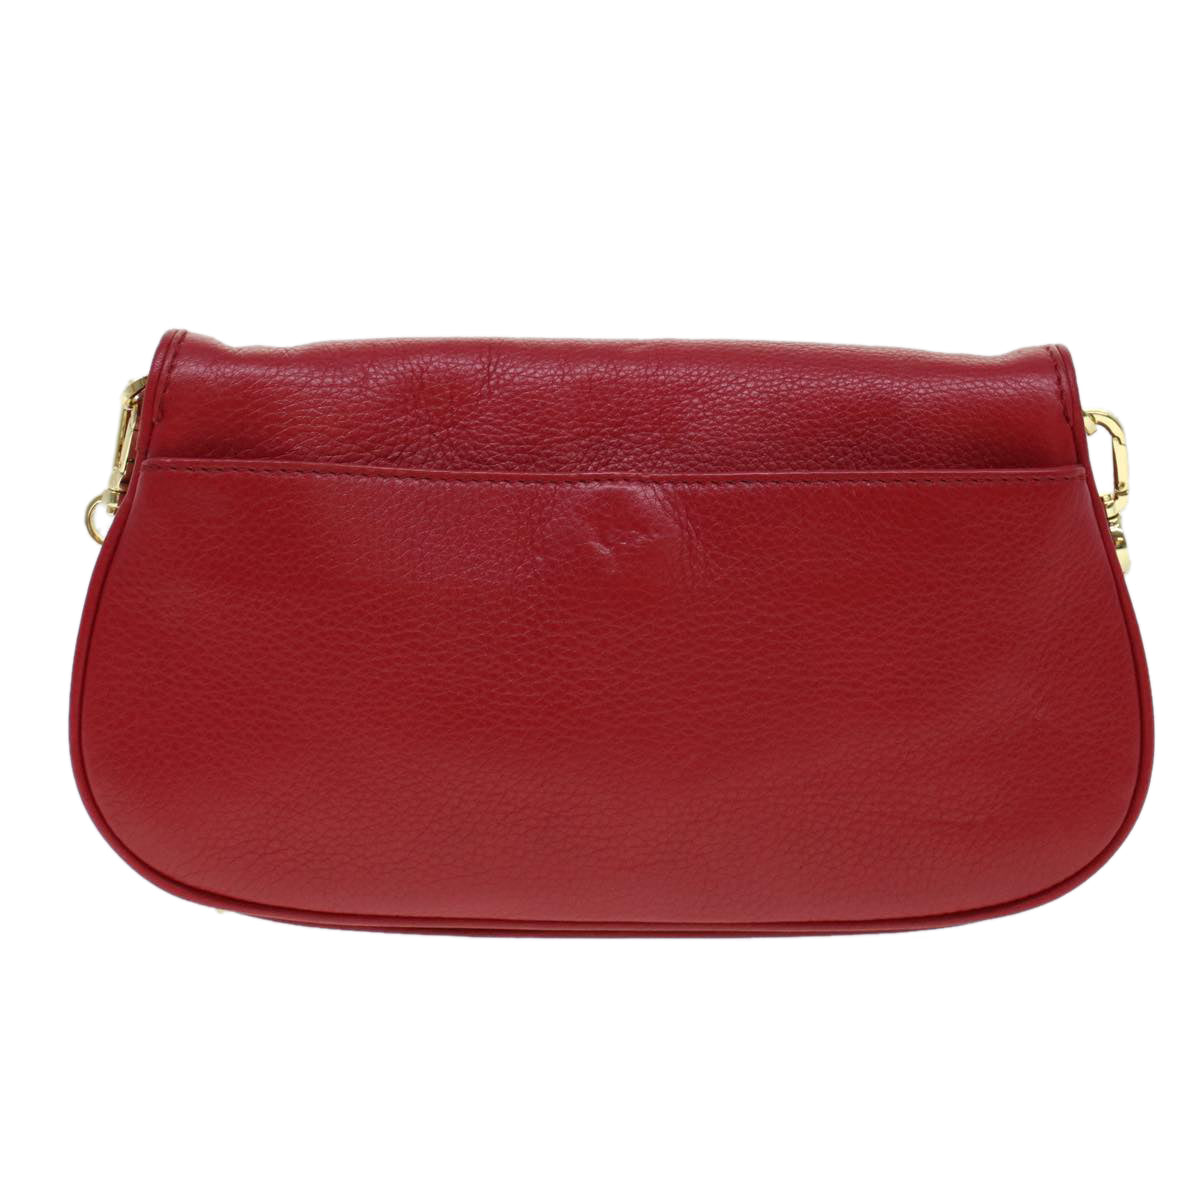 TORY BURCH Chain Shoulder Bag Leather Red HSP037 Auth am4539 - 0